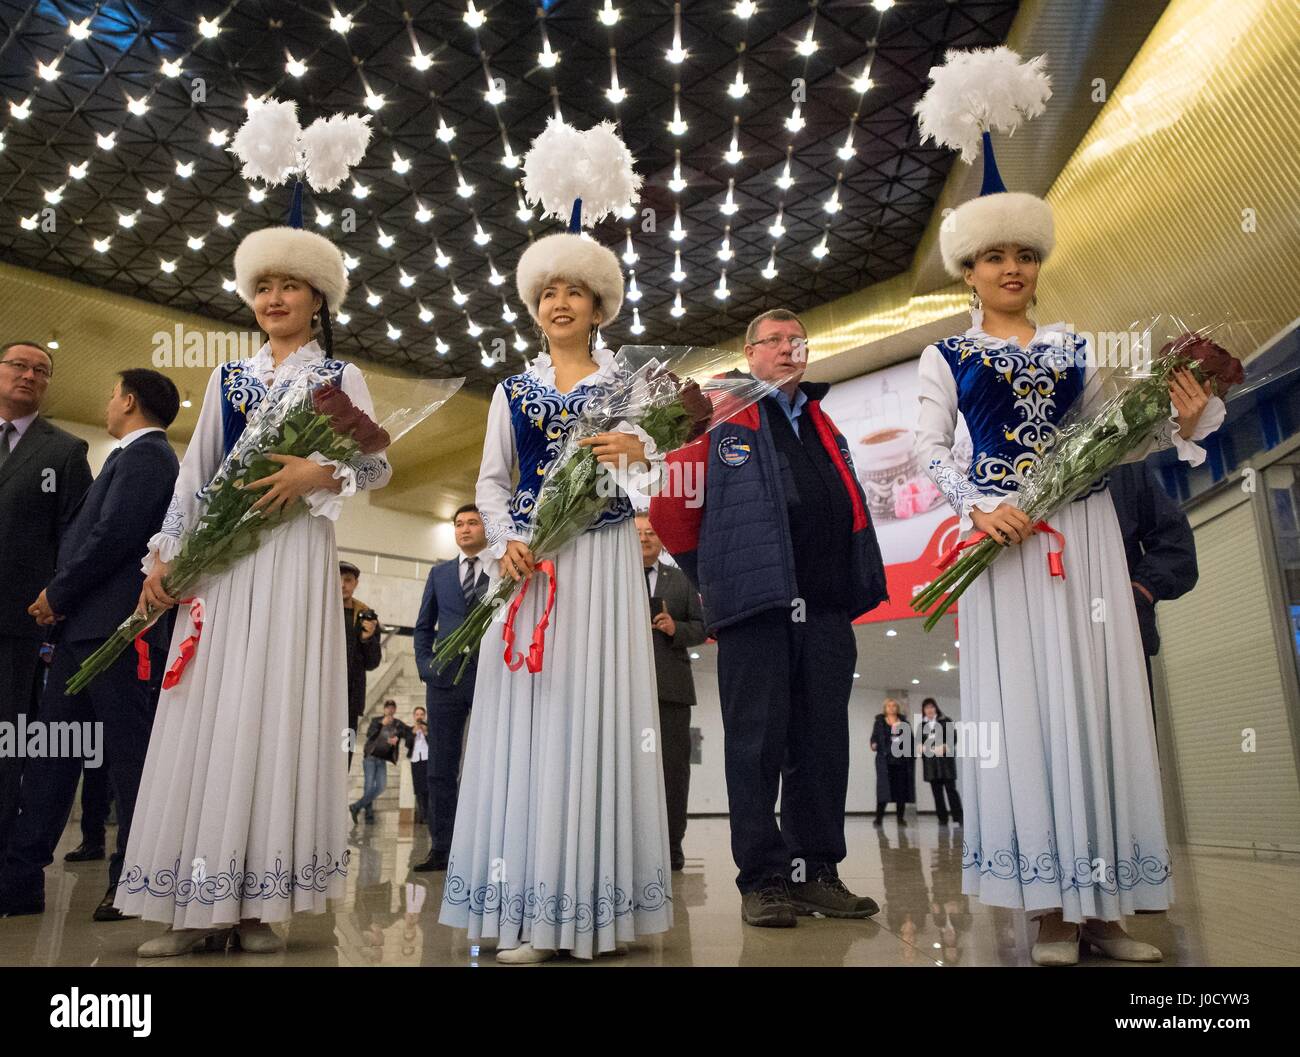 Zhezkazgan, Kazakhstan. 10th Apr, 2017. Kazakh women in traditional Kazakhstan costume wait for the crew of Expedition 50 at Karaganda Airport during the welcome ceremony after they landed in a remote area April 10, 2017 near Zhezkazgan, Kazakhstan. The spacecraft returned carrying the International Space Station Expedition 50 mission crew after 173 days in space. Credit: Planetpix/Alamy Live News Stock Photo